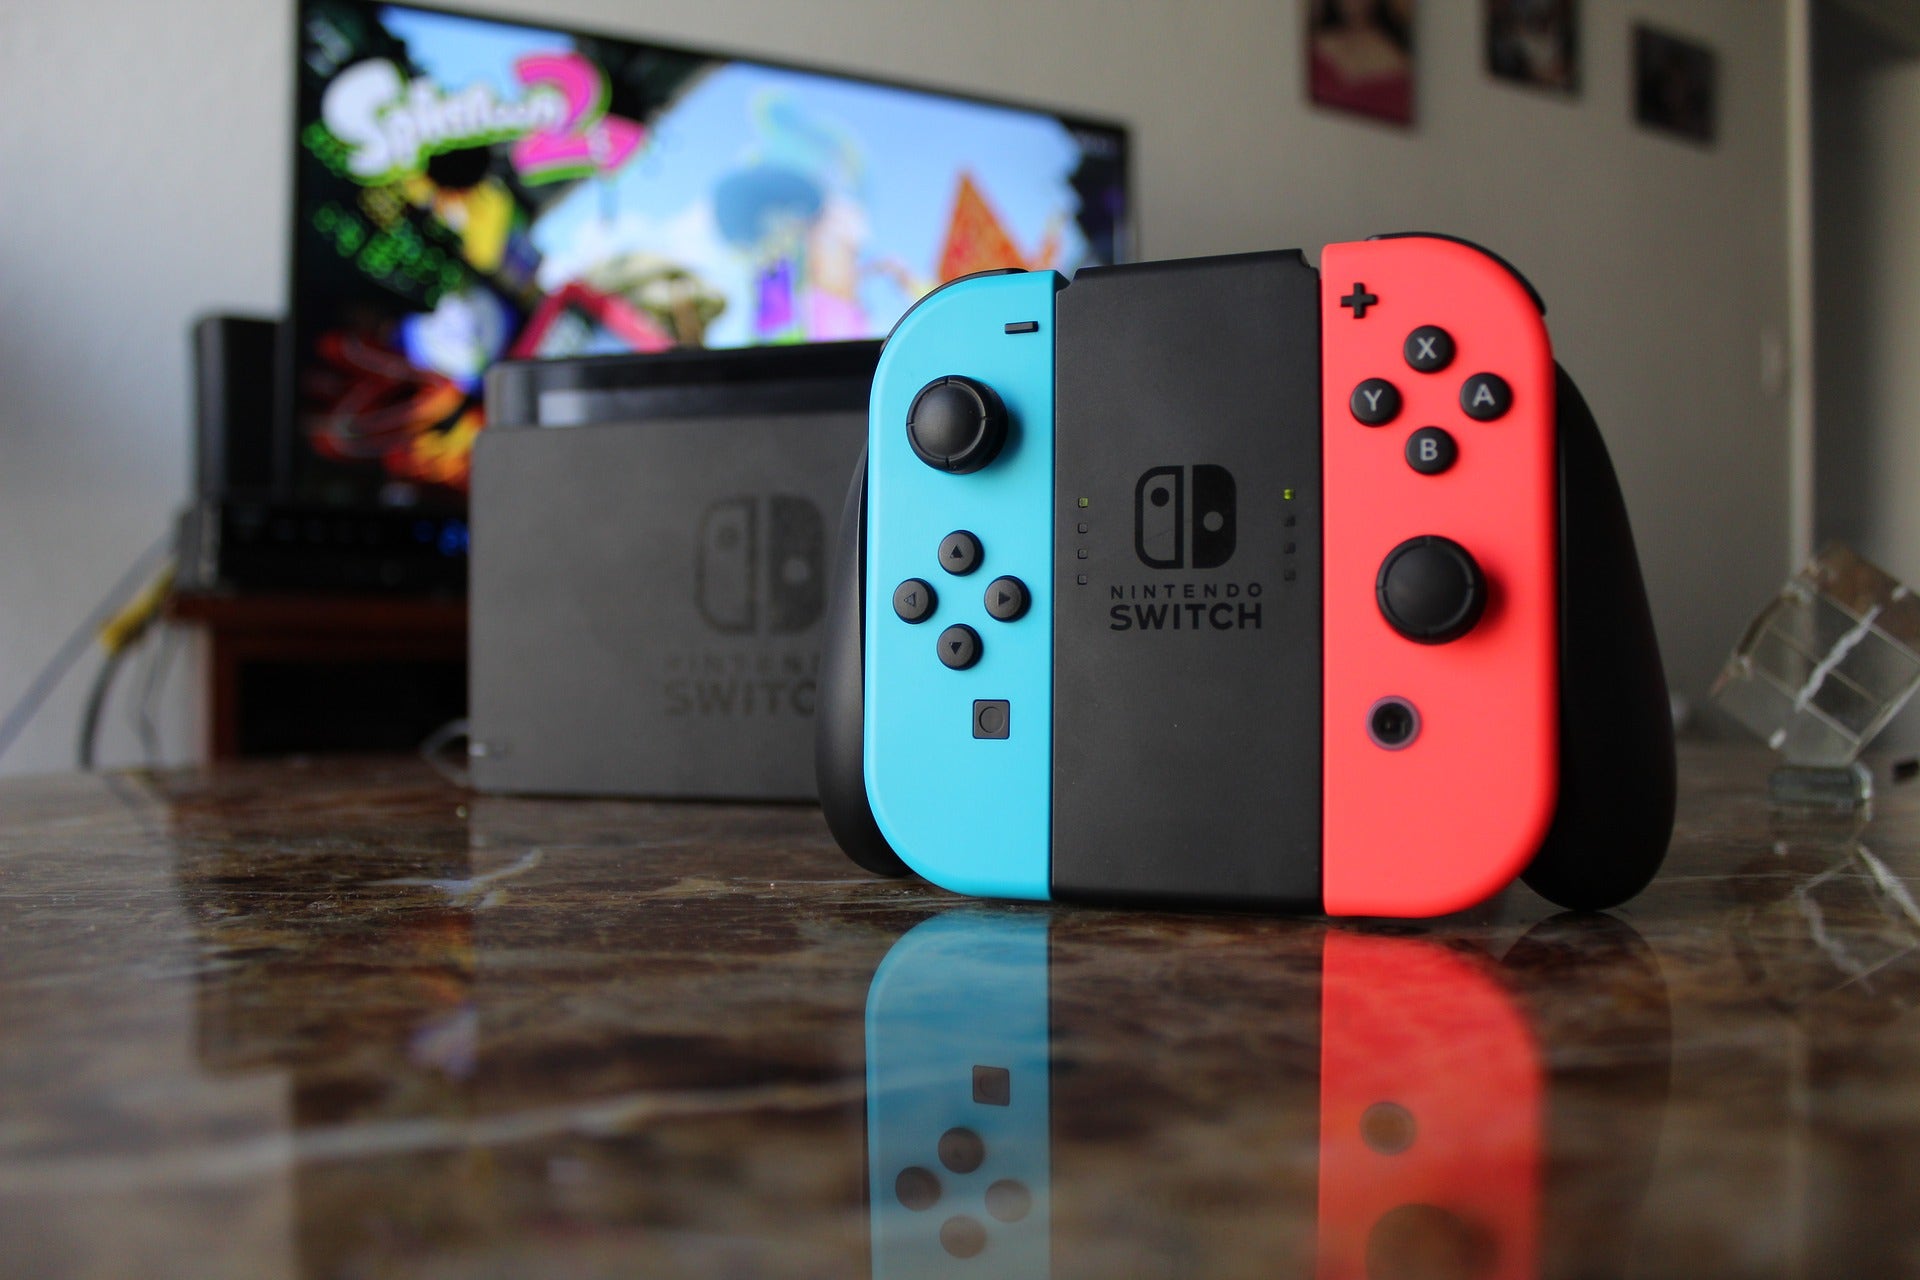 Nintendo To Hike Salaries By 10%, Lowers Outlook For Sales Of Consoles